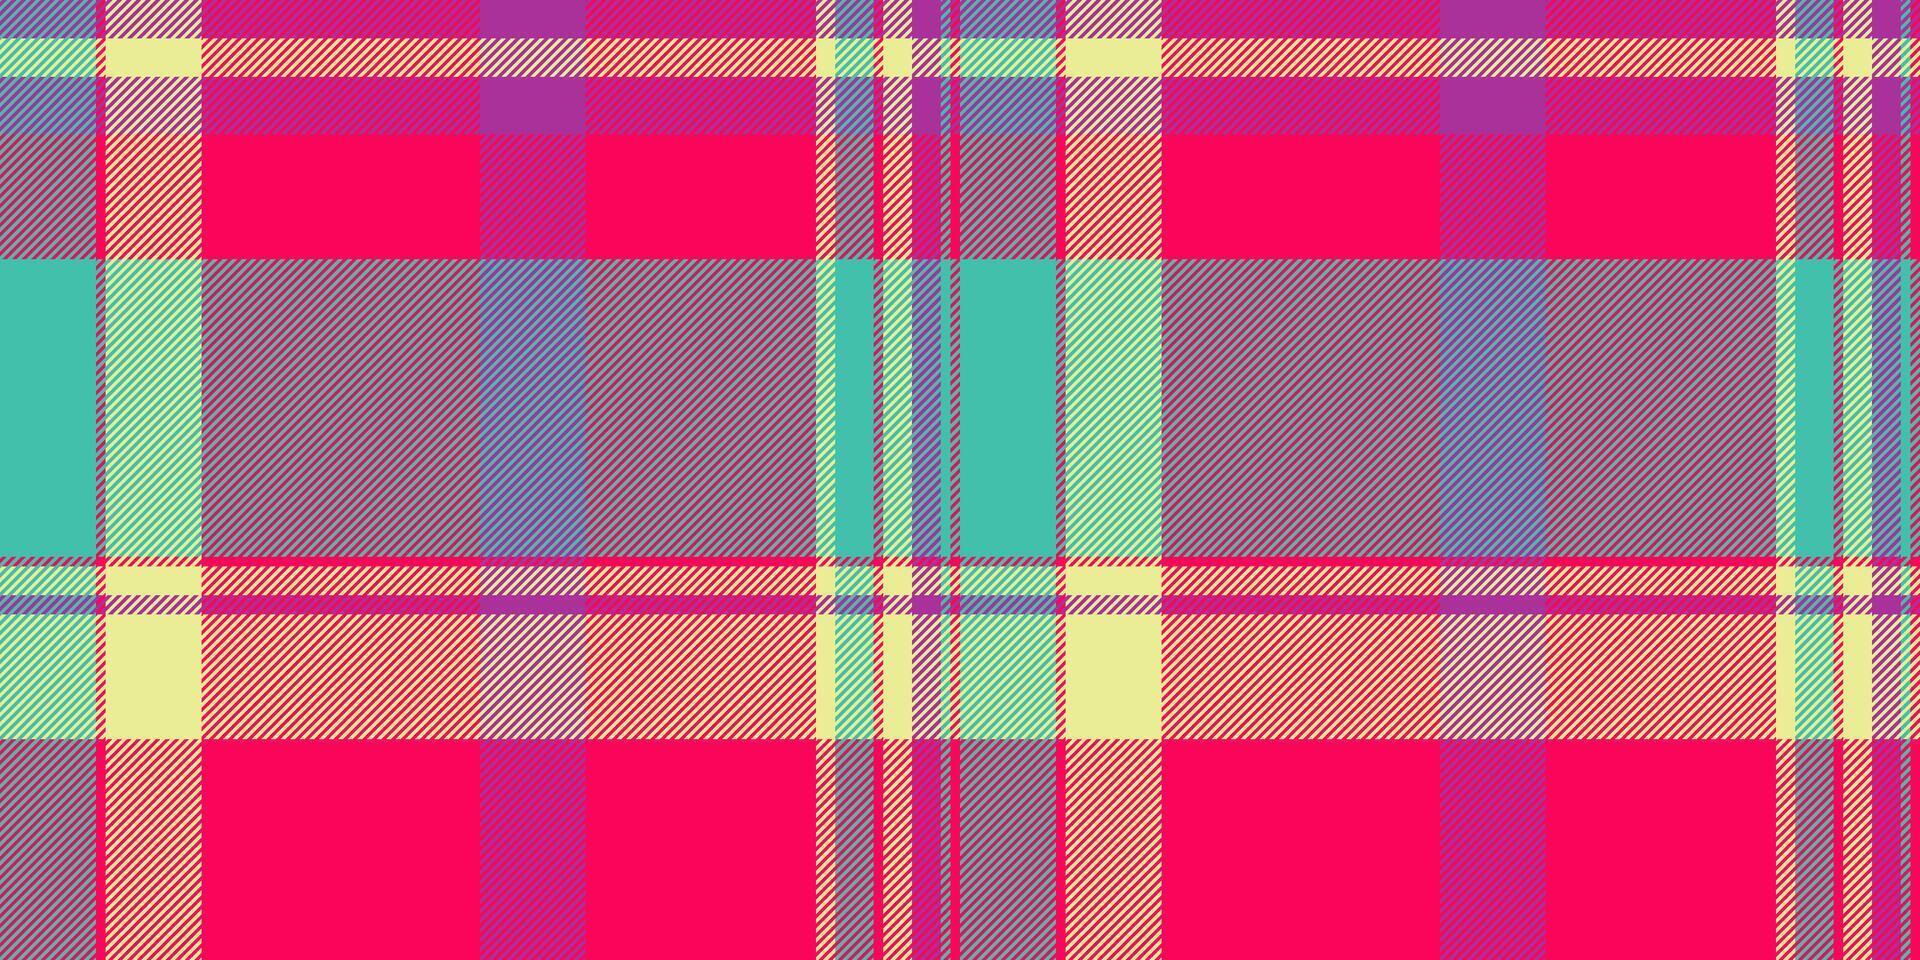 Sofa textile tartan background, covering texture check seamless. Checking pattern fabric plaid in bright and teal colors. vector